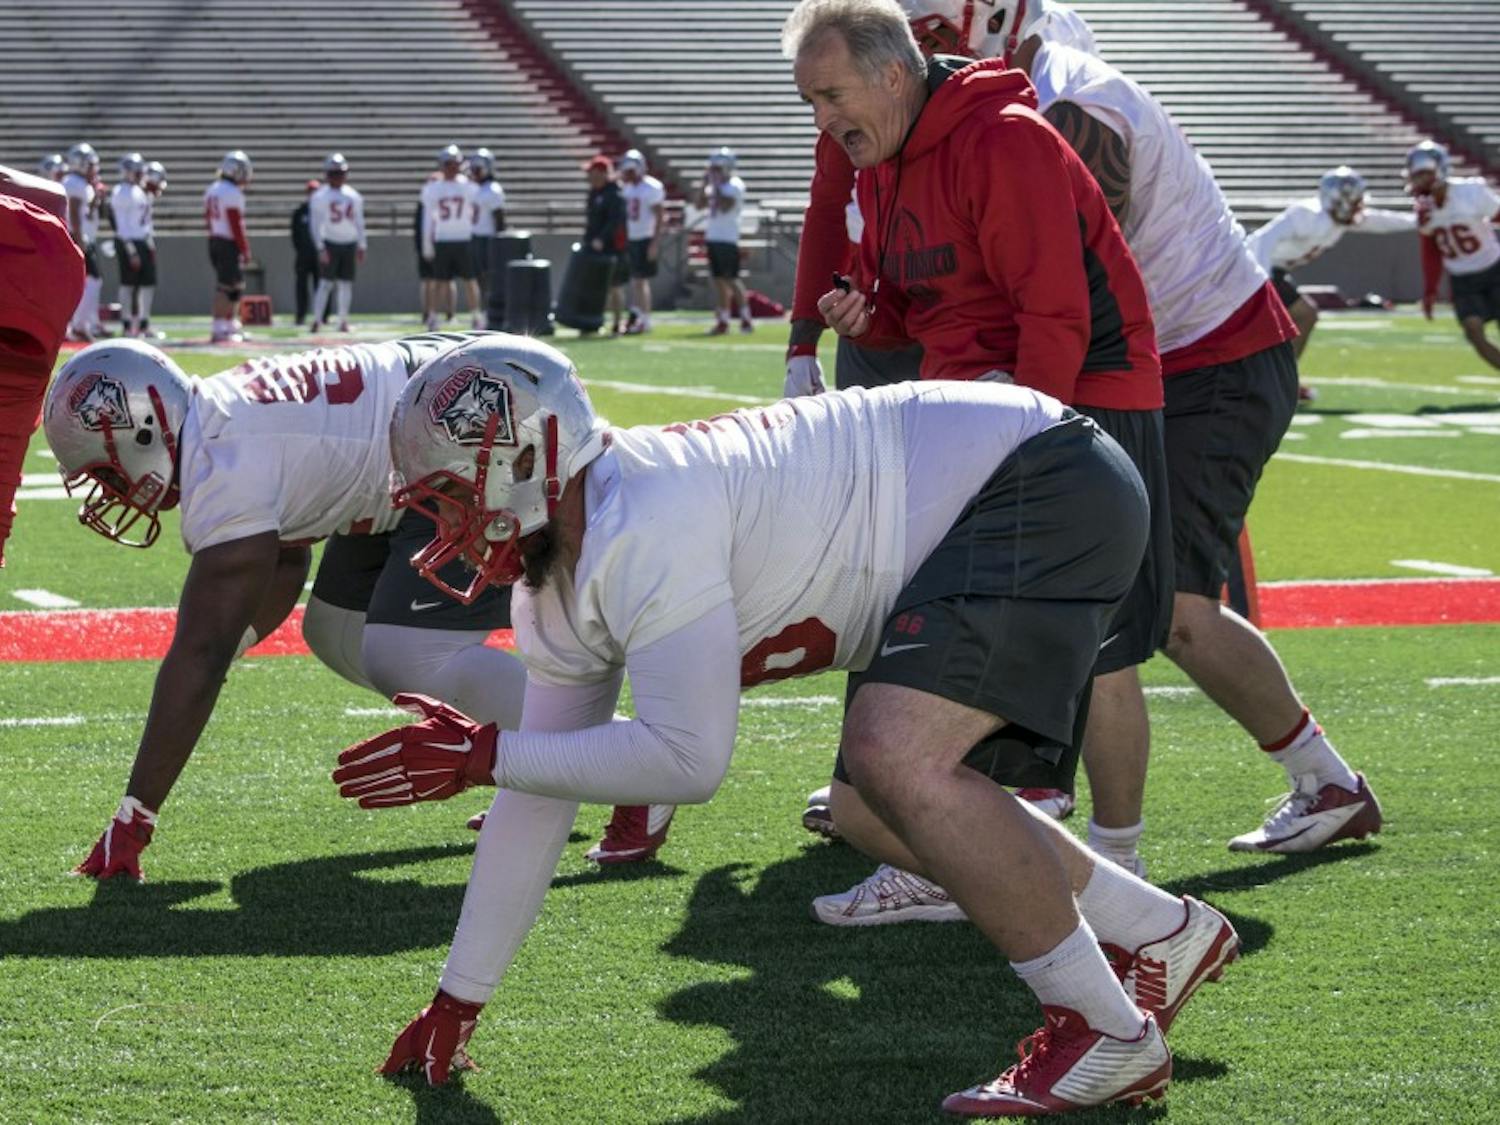 Redshirt junior defensive lineman Johnny Williams runs drills during the Lobo’s second season practice at University Stadium. Williams before playing coming onto the Lobos trained as an MMA fighter.